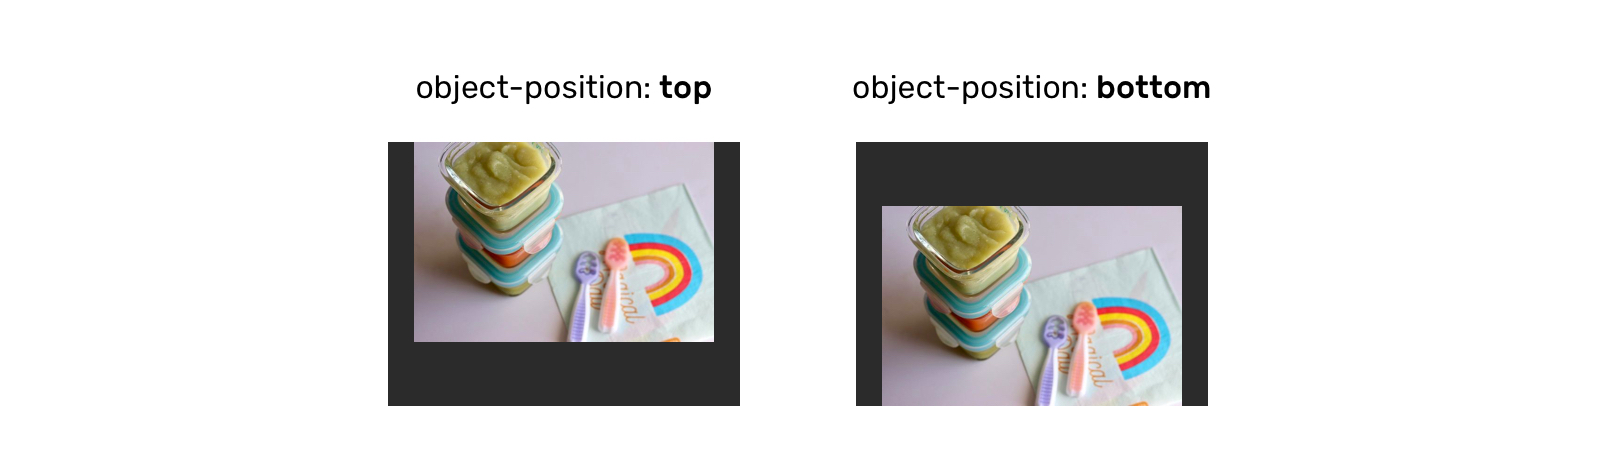 object-position top and bottom